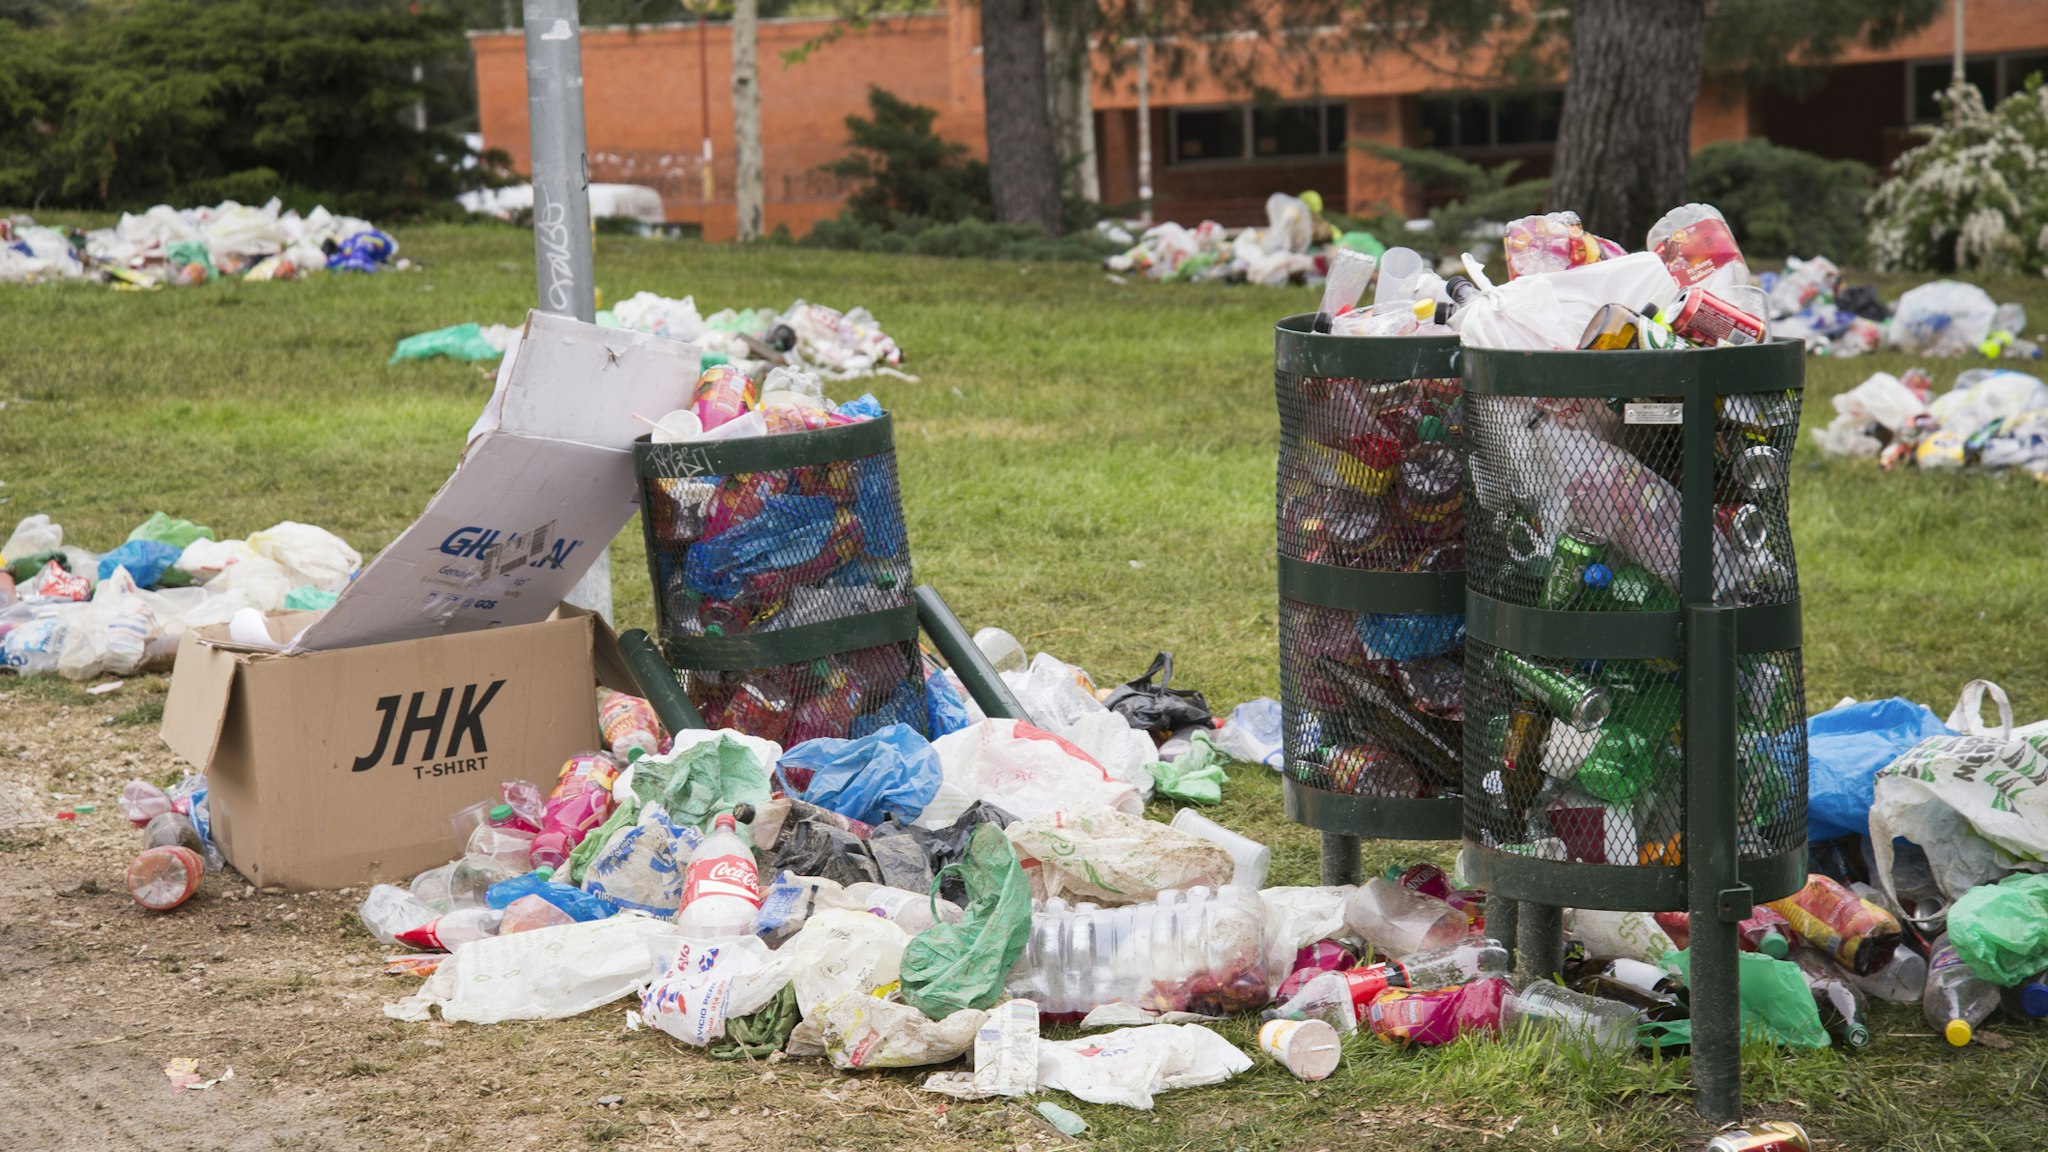 Garbage cans surrounded by plastic containers and glass bottles after a street drinking party (called in Spanish 'botellón') in a green area of Ciudad Universitaria Campus, Complutense University, Madrid, Spain.